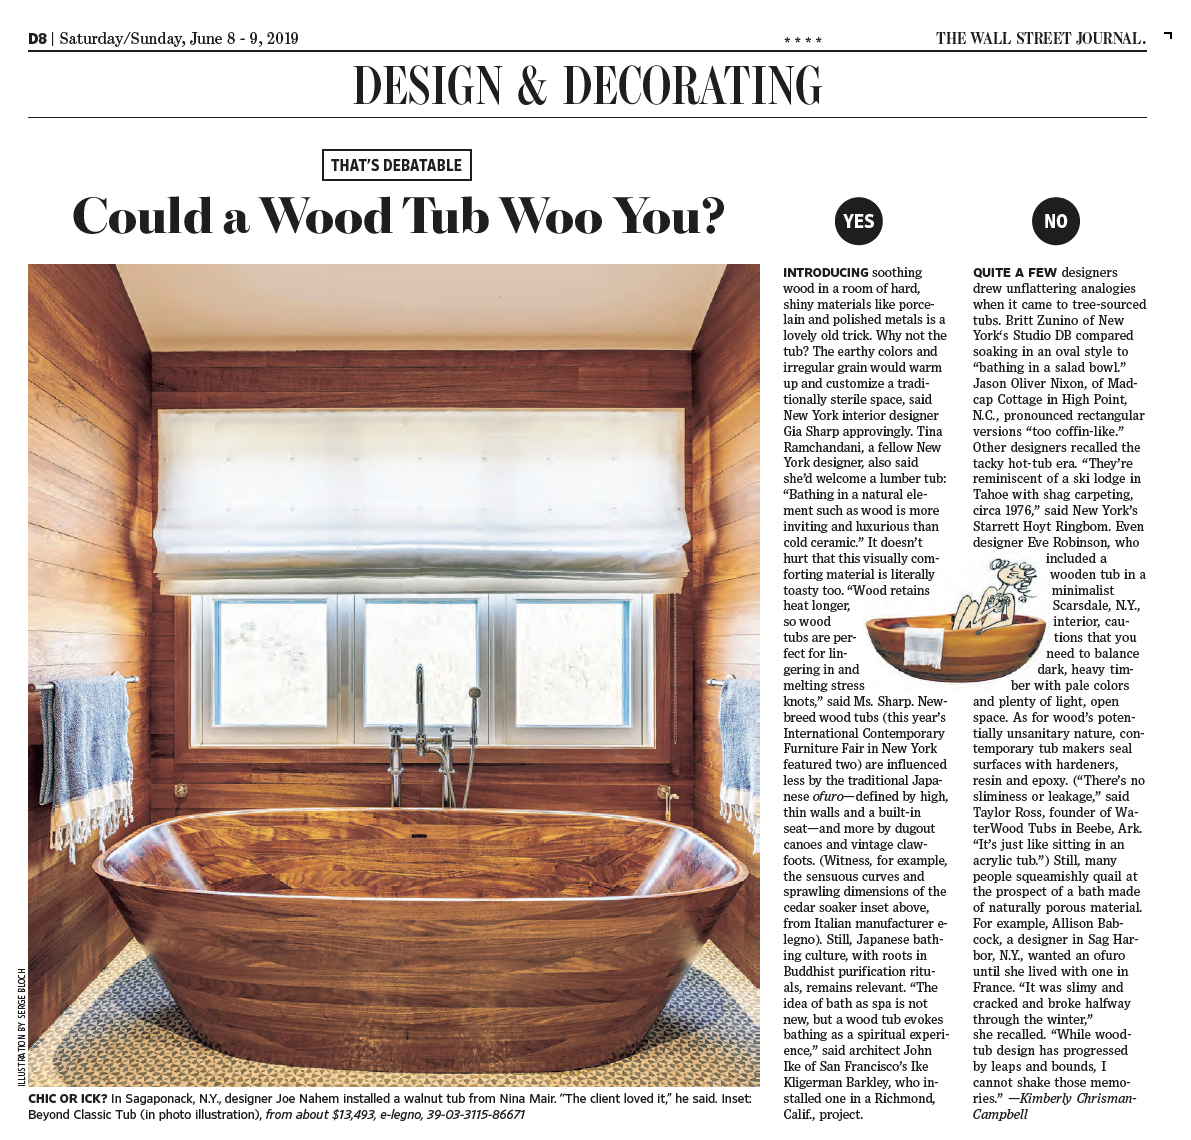 CH Feature in The Wall Street Journal